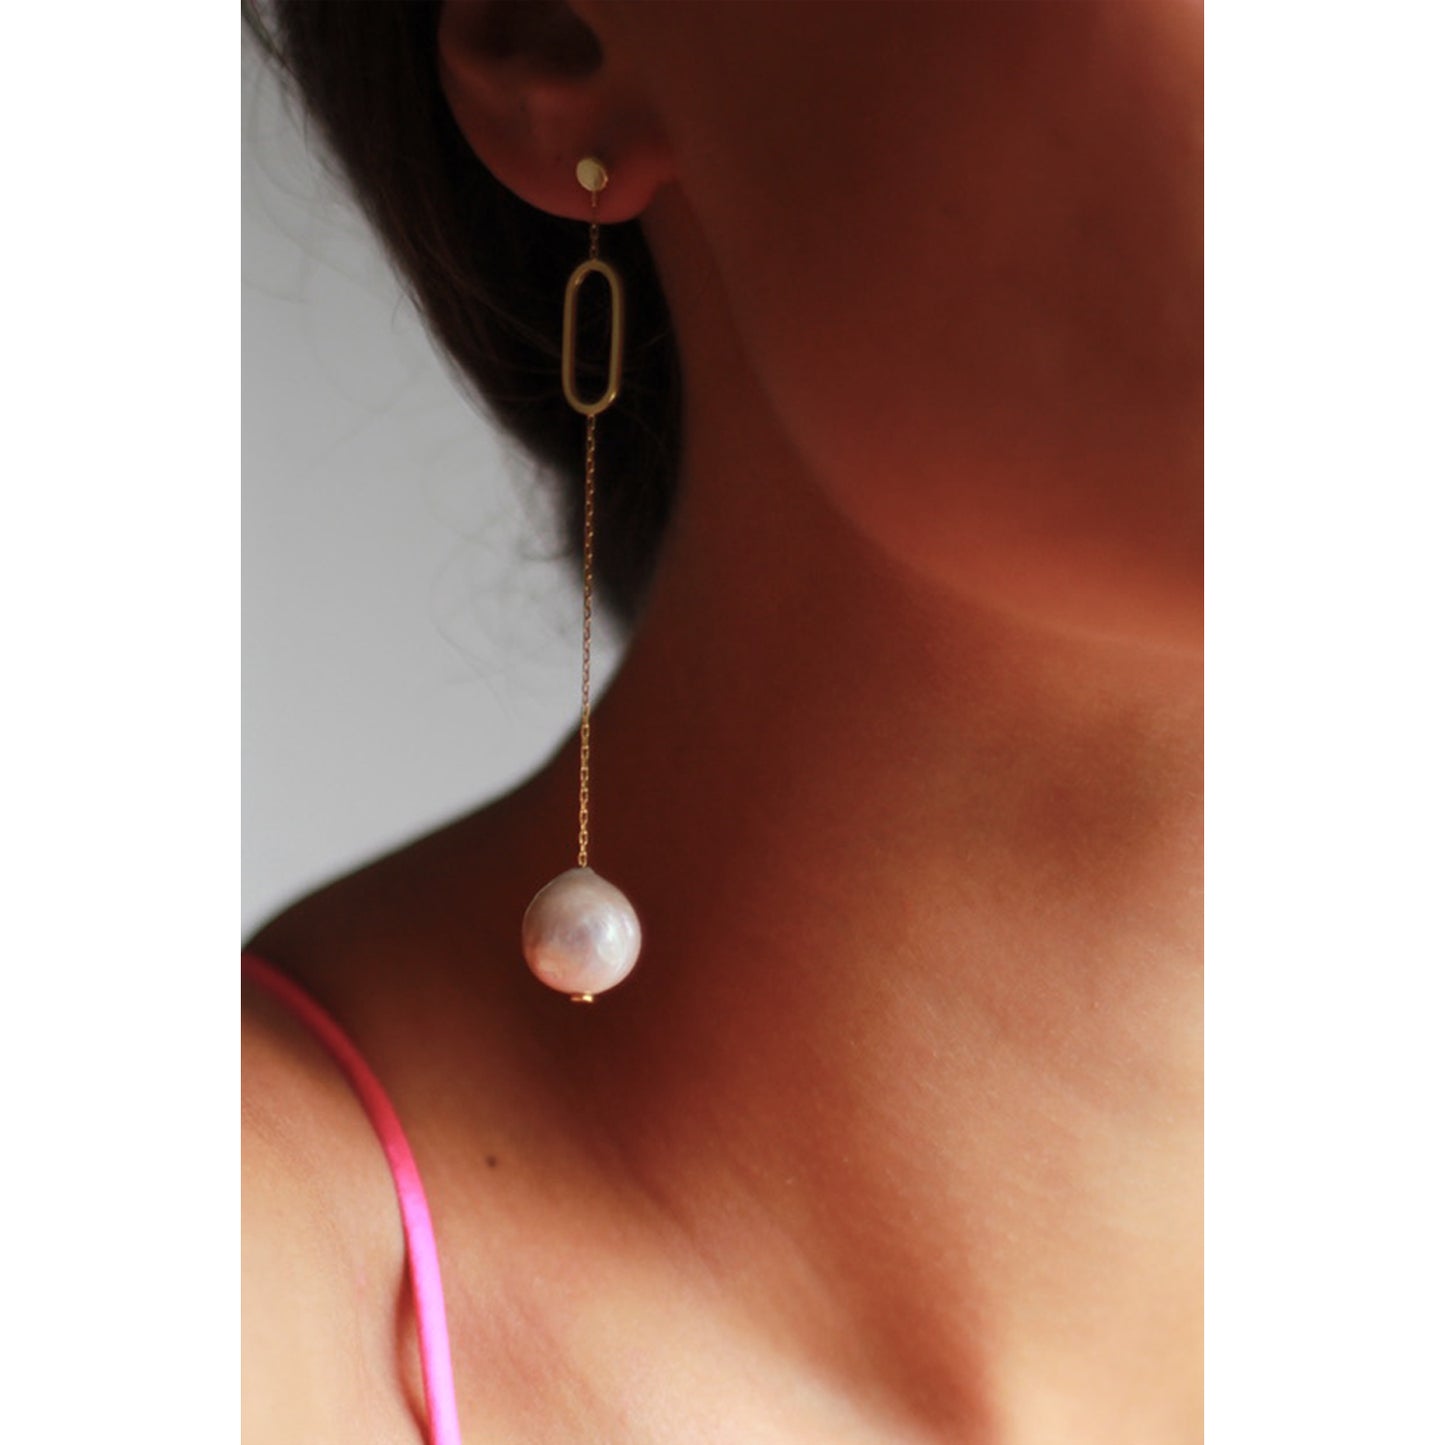 Linked with Love Earrings With Pink Baroque Pearl on model